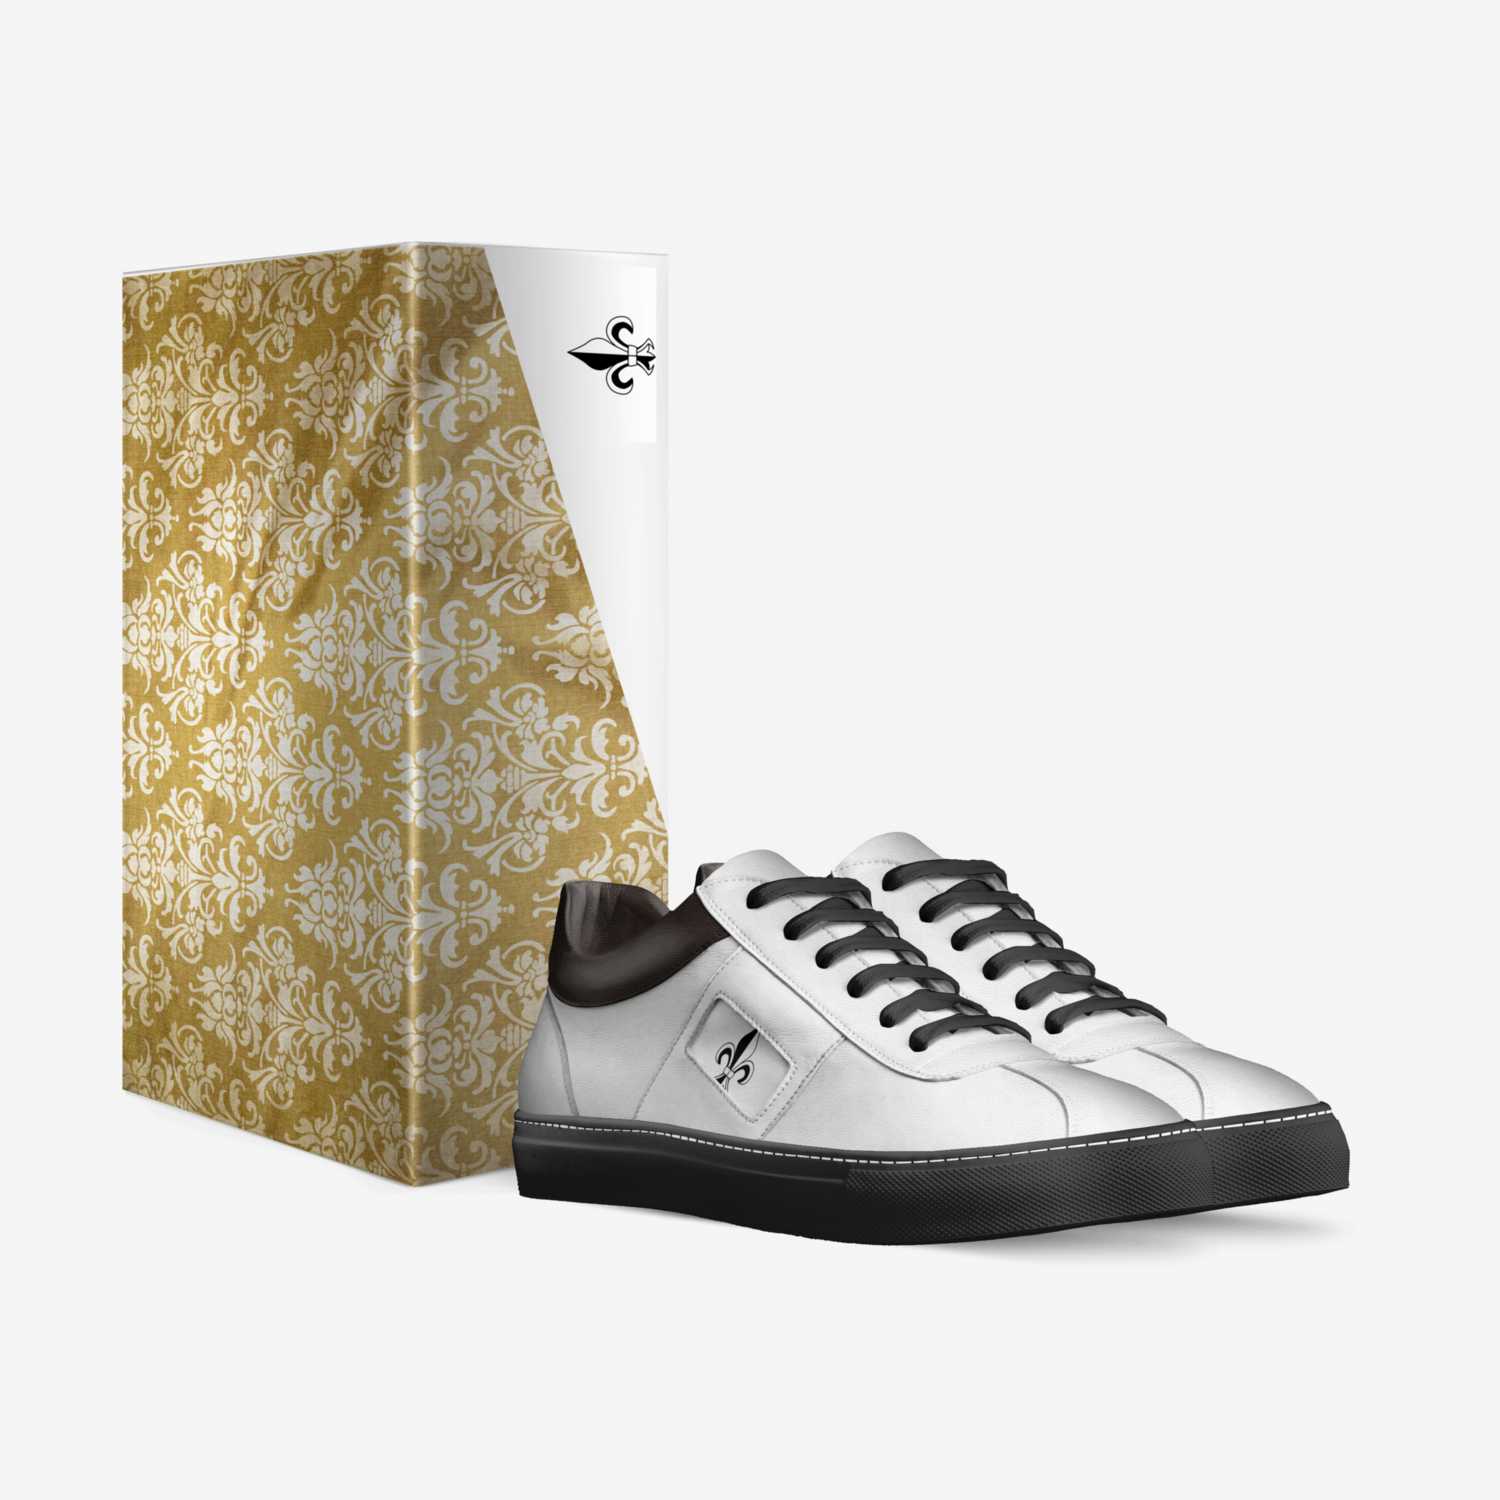 Fleur de Lys custom made in Italy shoes by Christopher John | Box view